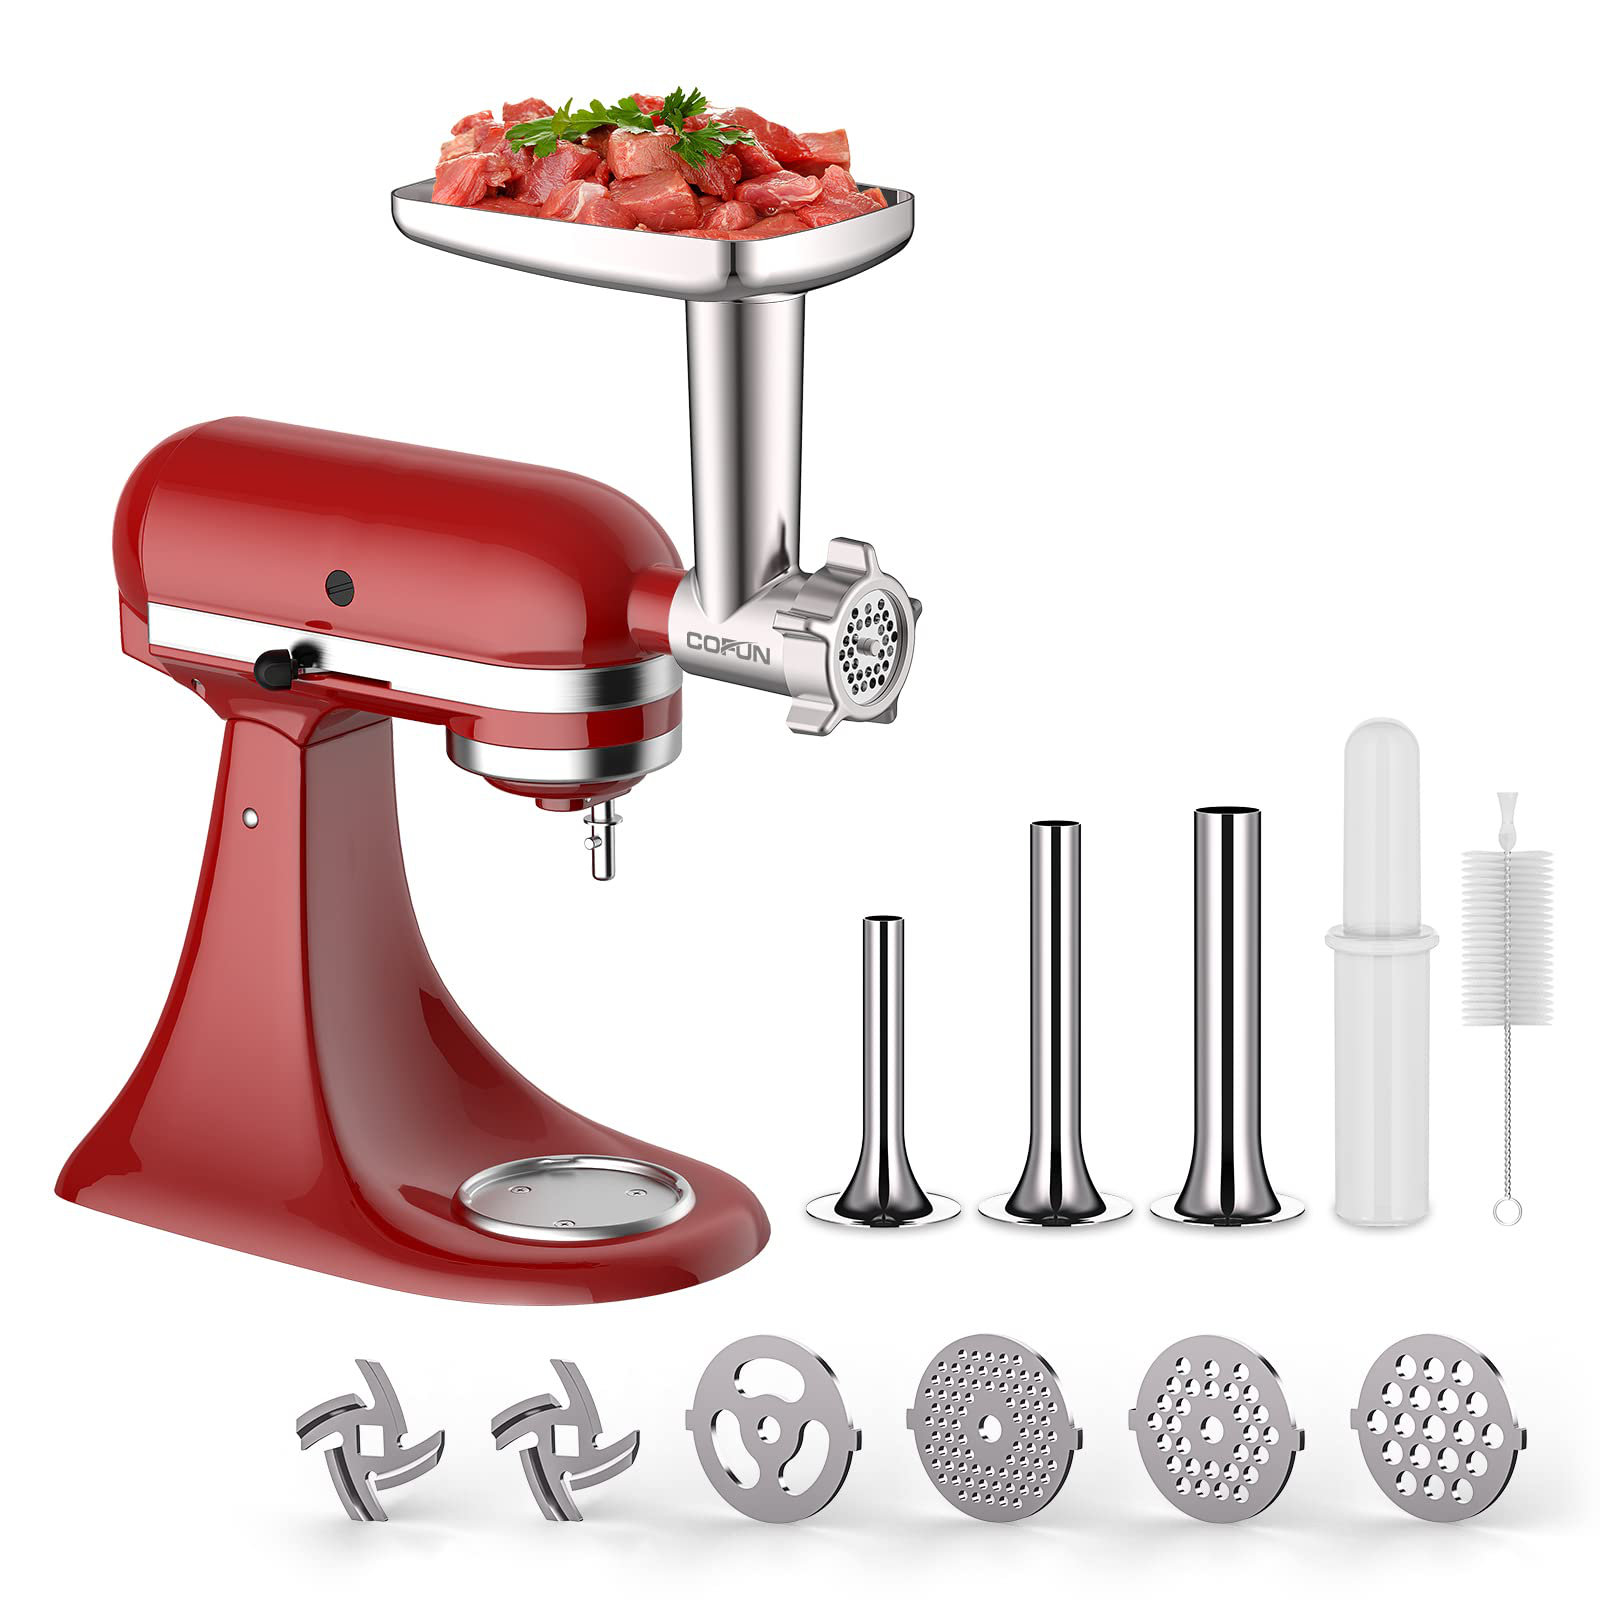 Metal Food Grinder Attachments for-KitchenAid Stand Mixers Meat